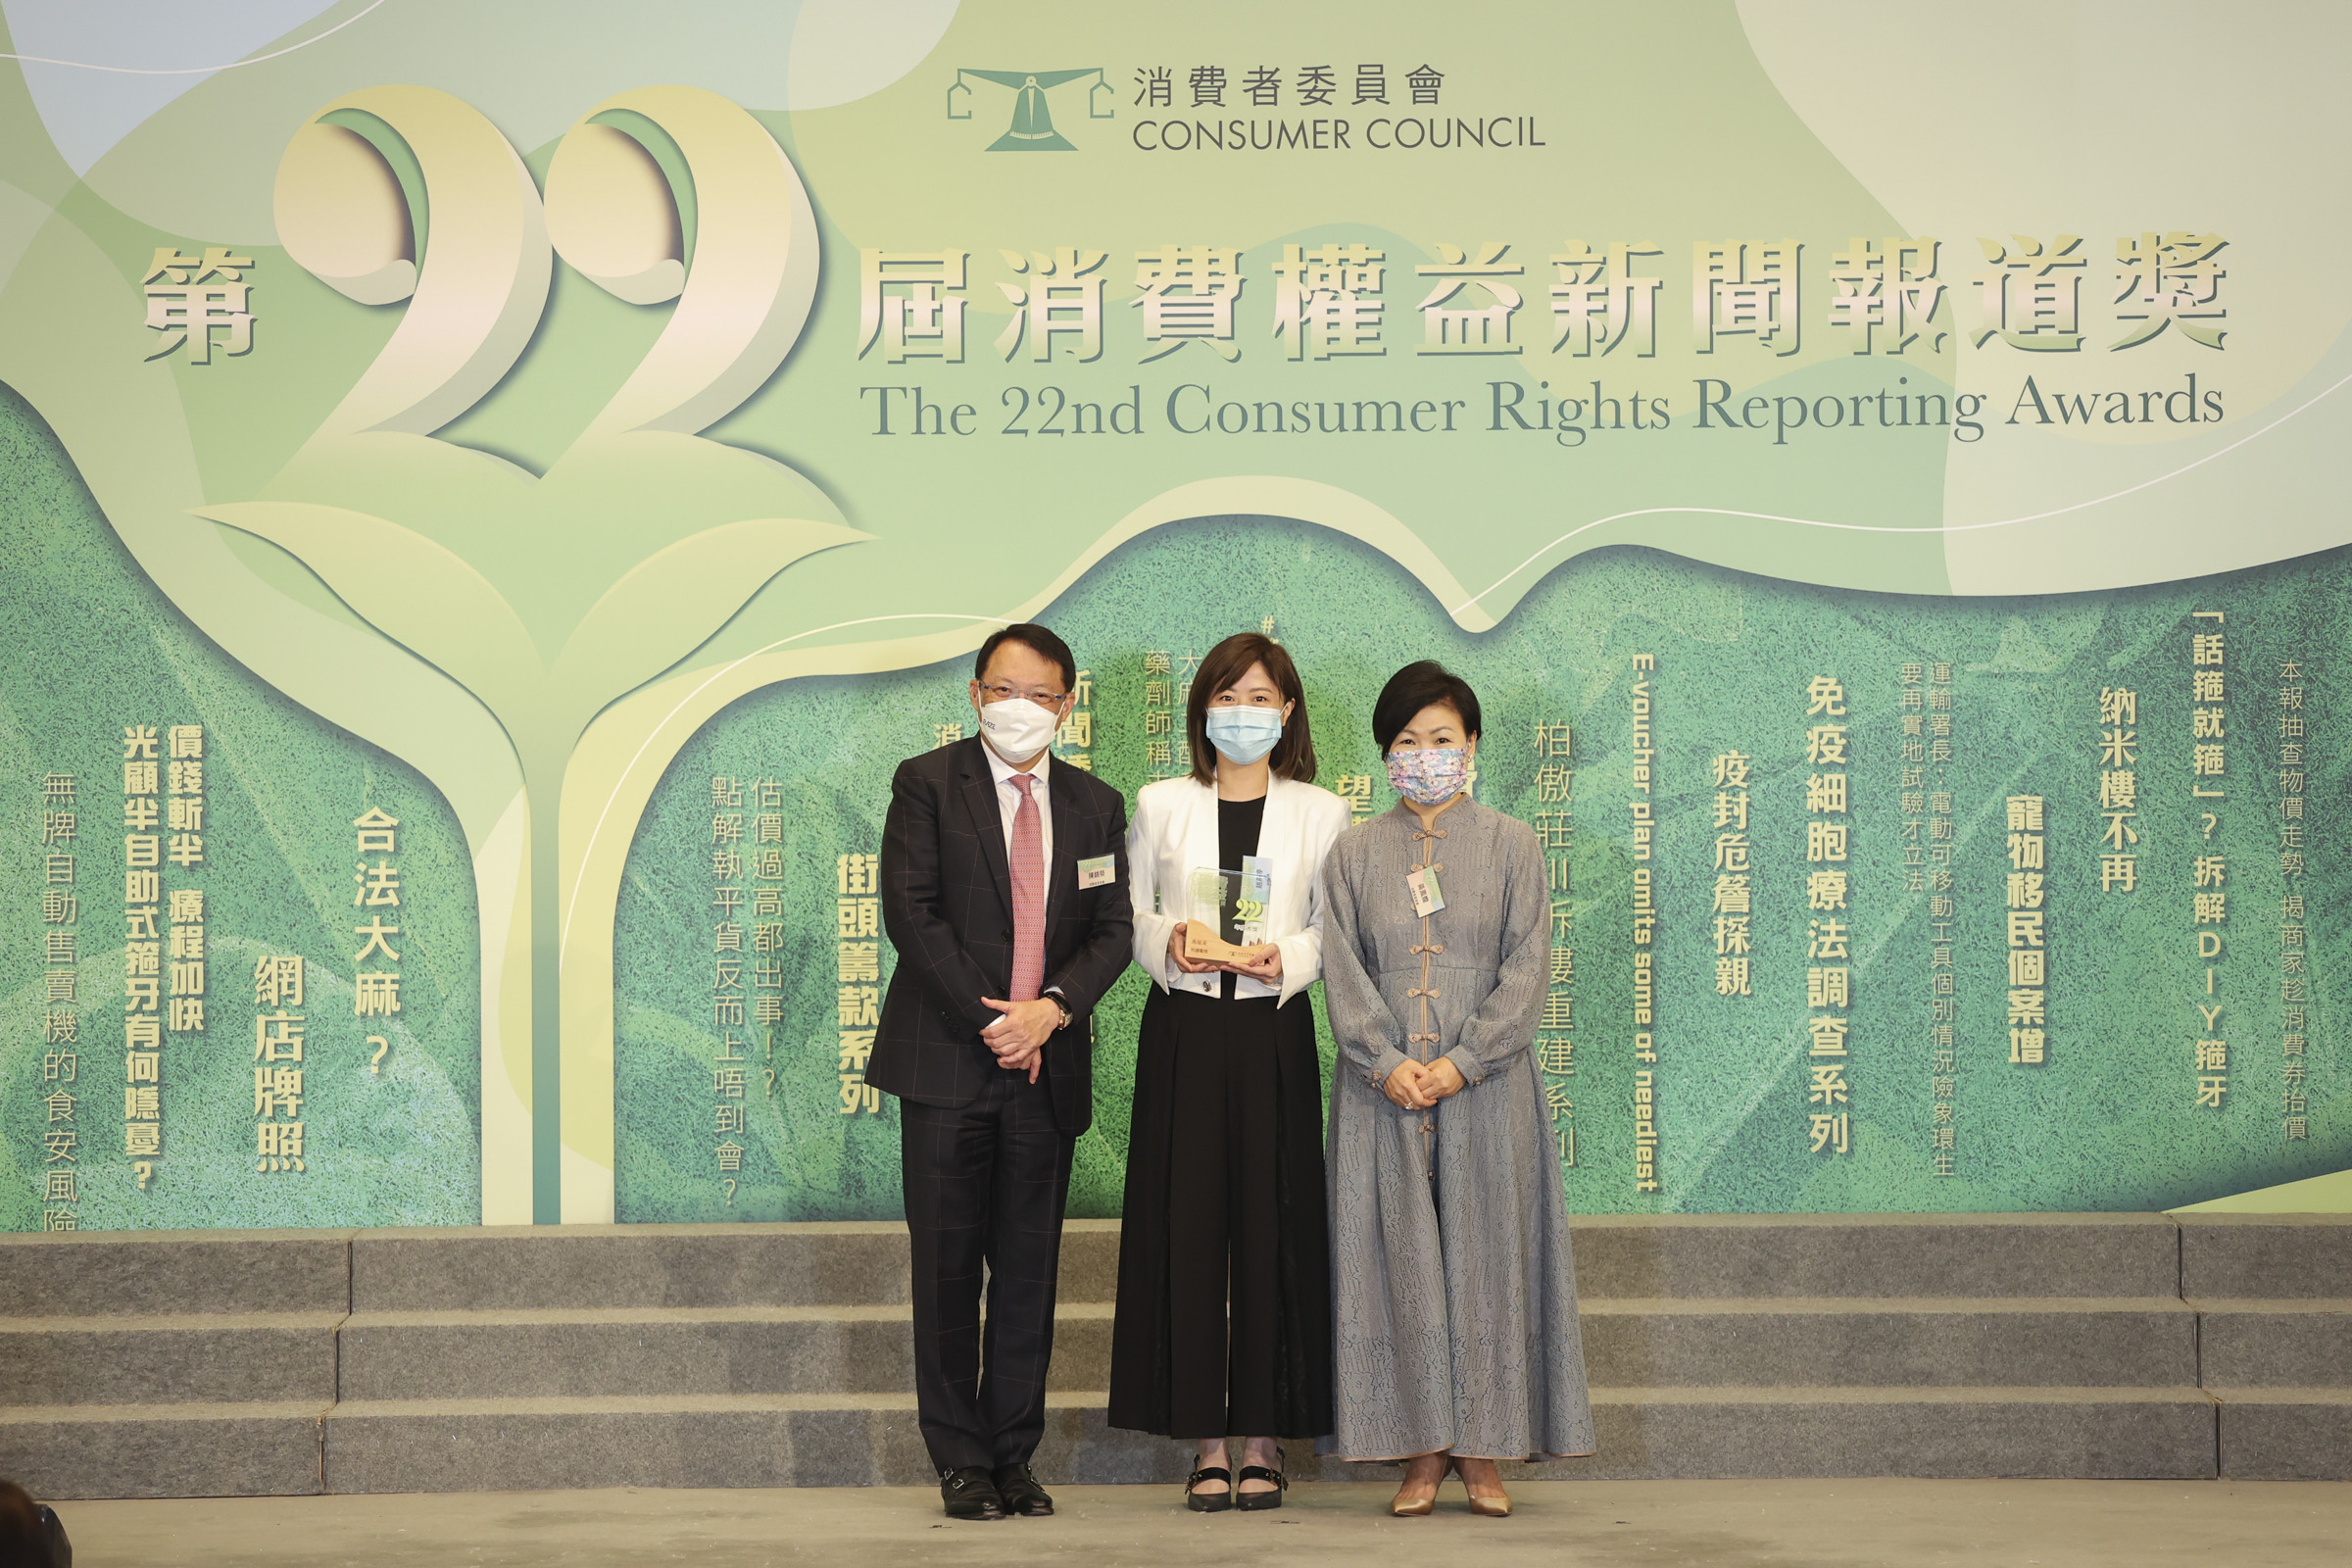 7.	The TVB reporting crew which produced “News Magazine: Beauty from Injection?” (新闻透视：越打越靓？), the winning entry of both the Grand Award and Gold Award in Video Reporting (Long Clip) Category, receives the trophy from Mr Clement Chan Kam-wing, Chairman of the Consumer Council and Ms Gilly Wong Fung-han, Chief Executive of the Consumer Council.